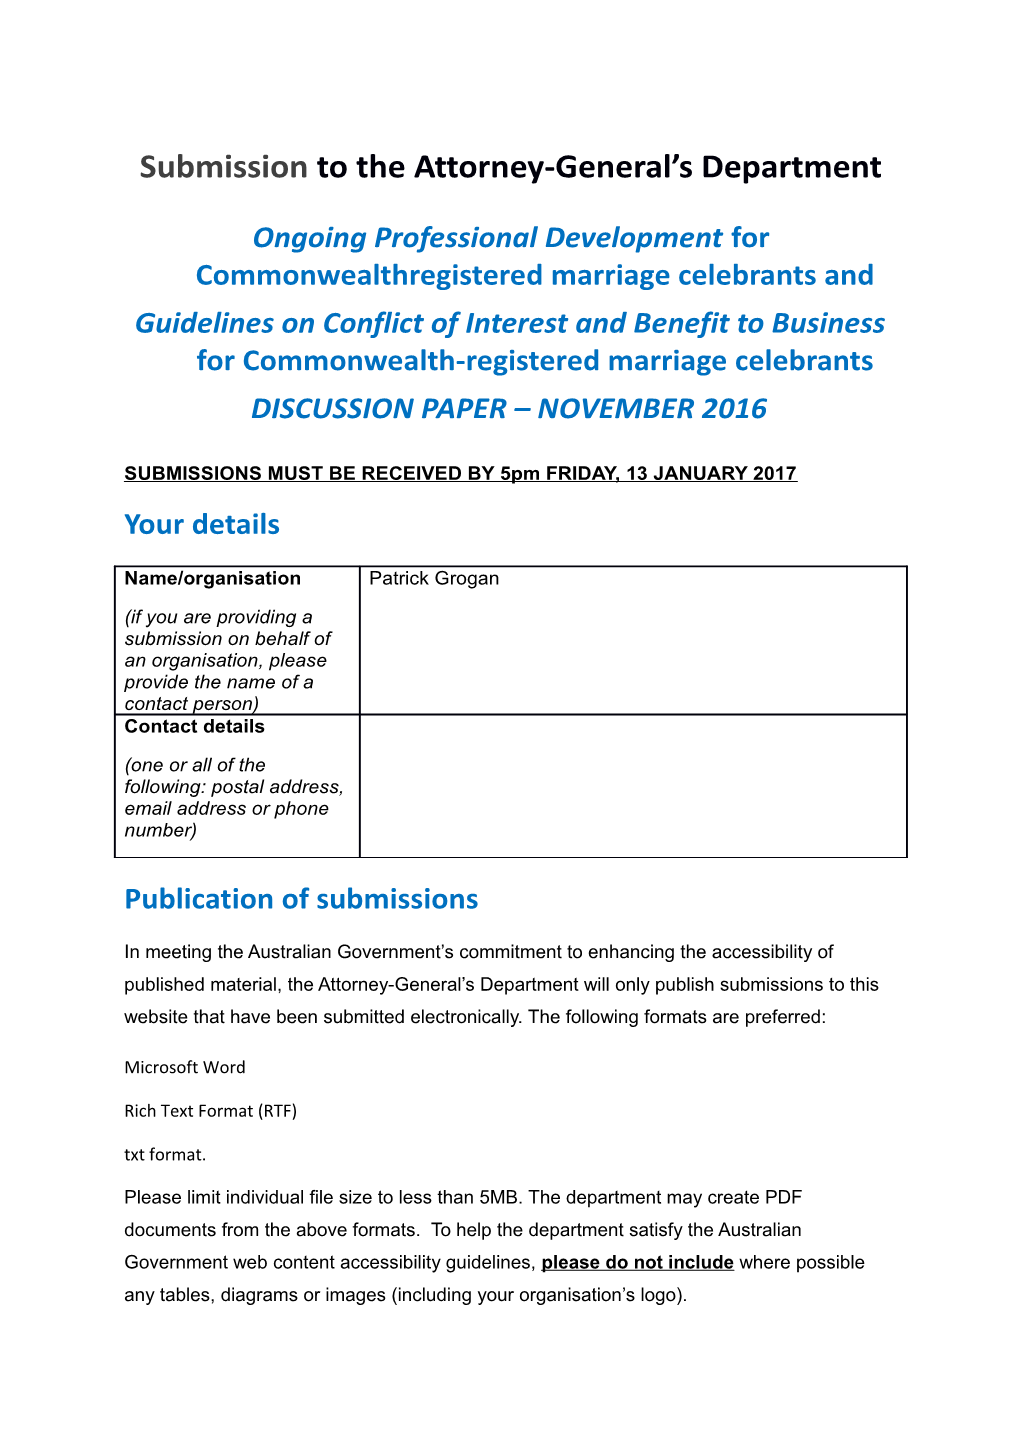 Submissions to OPD for Marriage Celebrants Consultation - Patrick Grogan